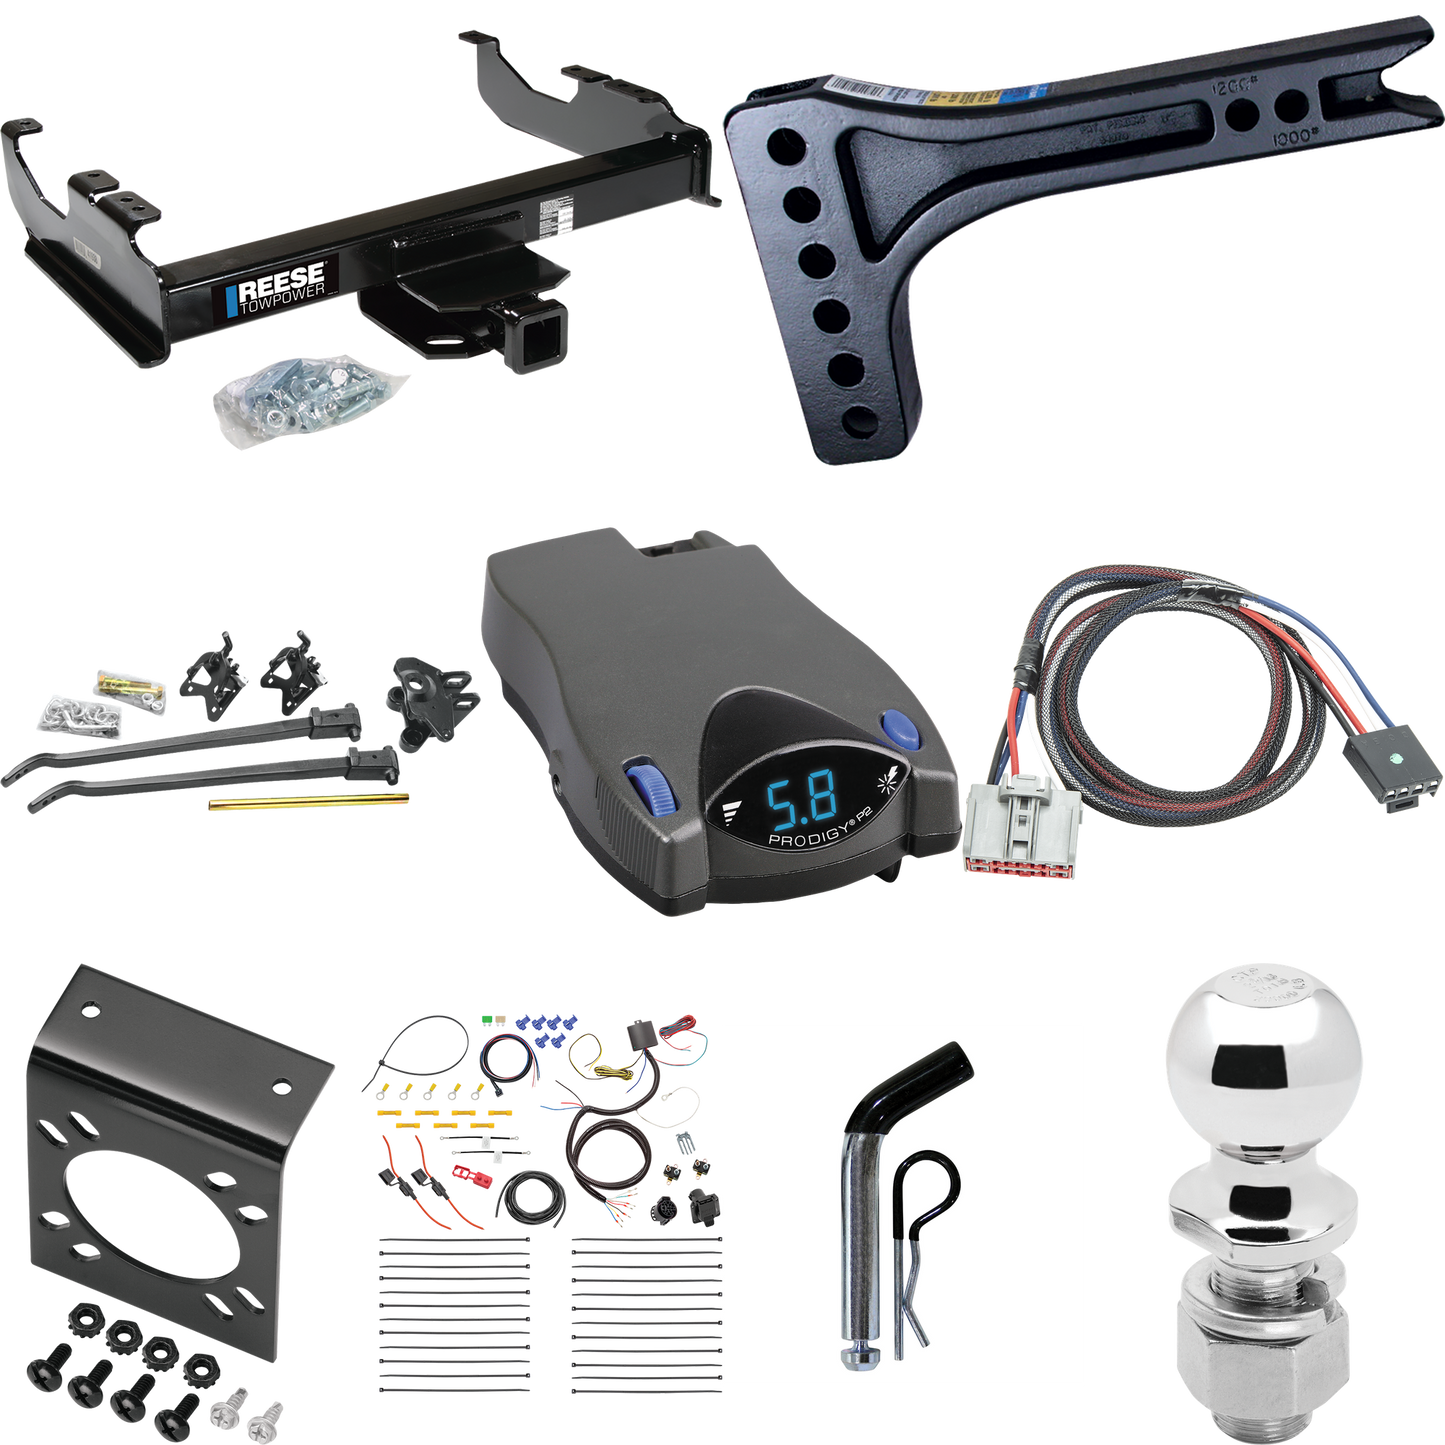 Fits 2020-2019 Chevrolet Silverado 3500 HD Trailer Hitch Tow PKG w/ 15K Trunnion Bar Weight Distribution Hitch + Pin/Clip + 2-5/16" Ball + Tekonsha Prodigy P2 Brake Control + Plug & Play BC Adapter + 7-Way RV Wiring (For Cab & Chassis, w/34" Wide Fra